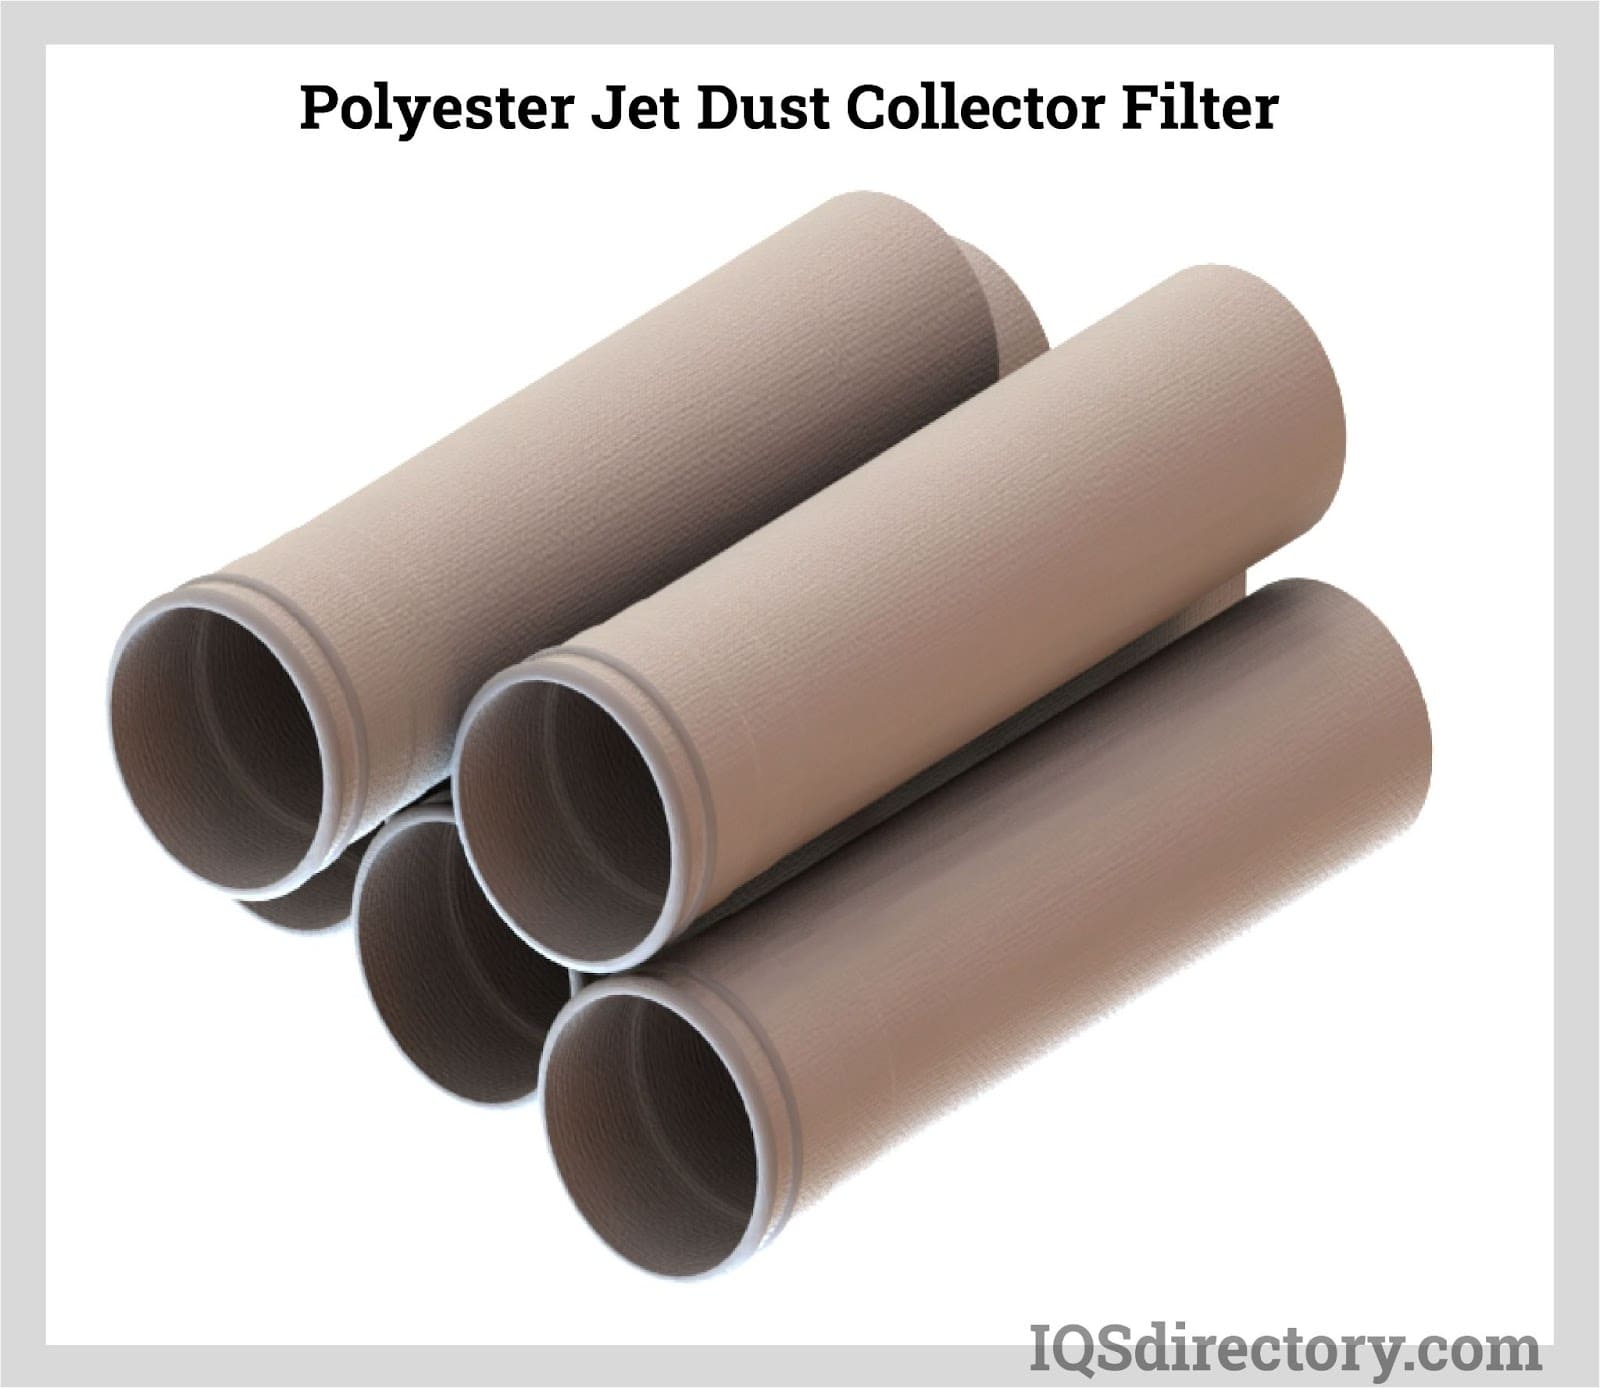 Polyester Jet Dust Collector Filter